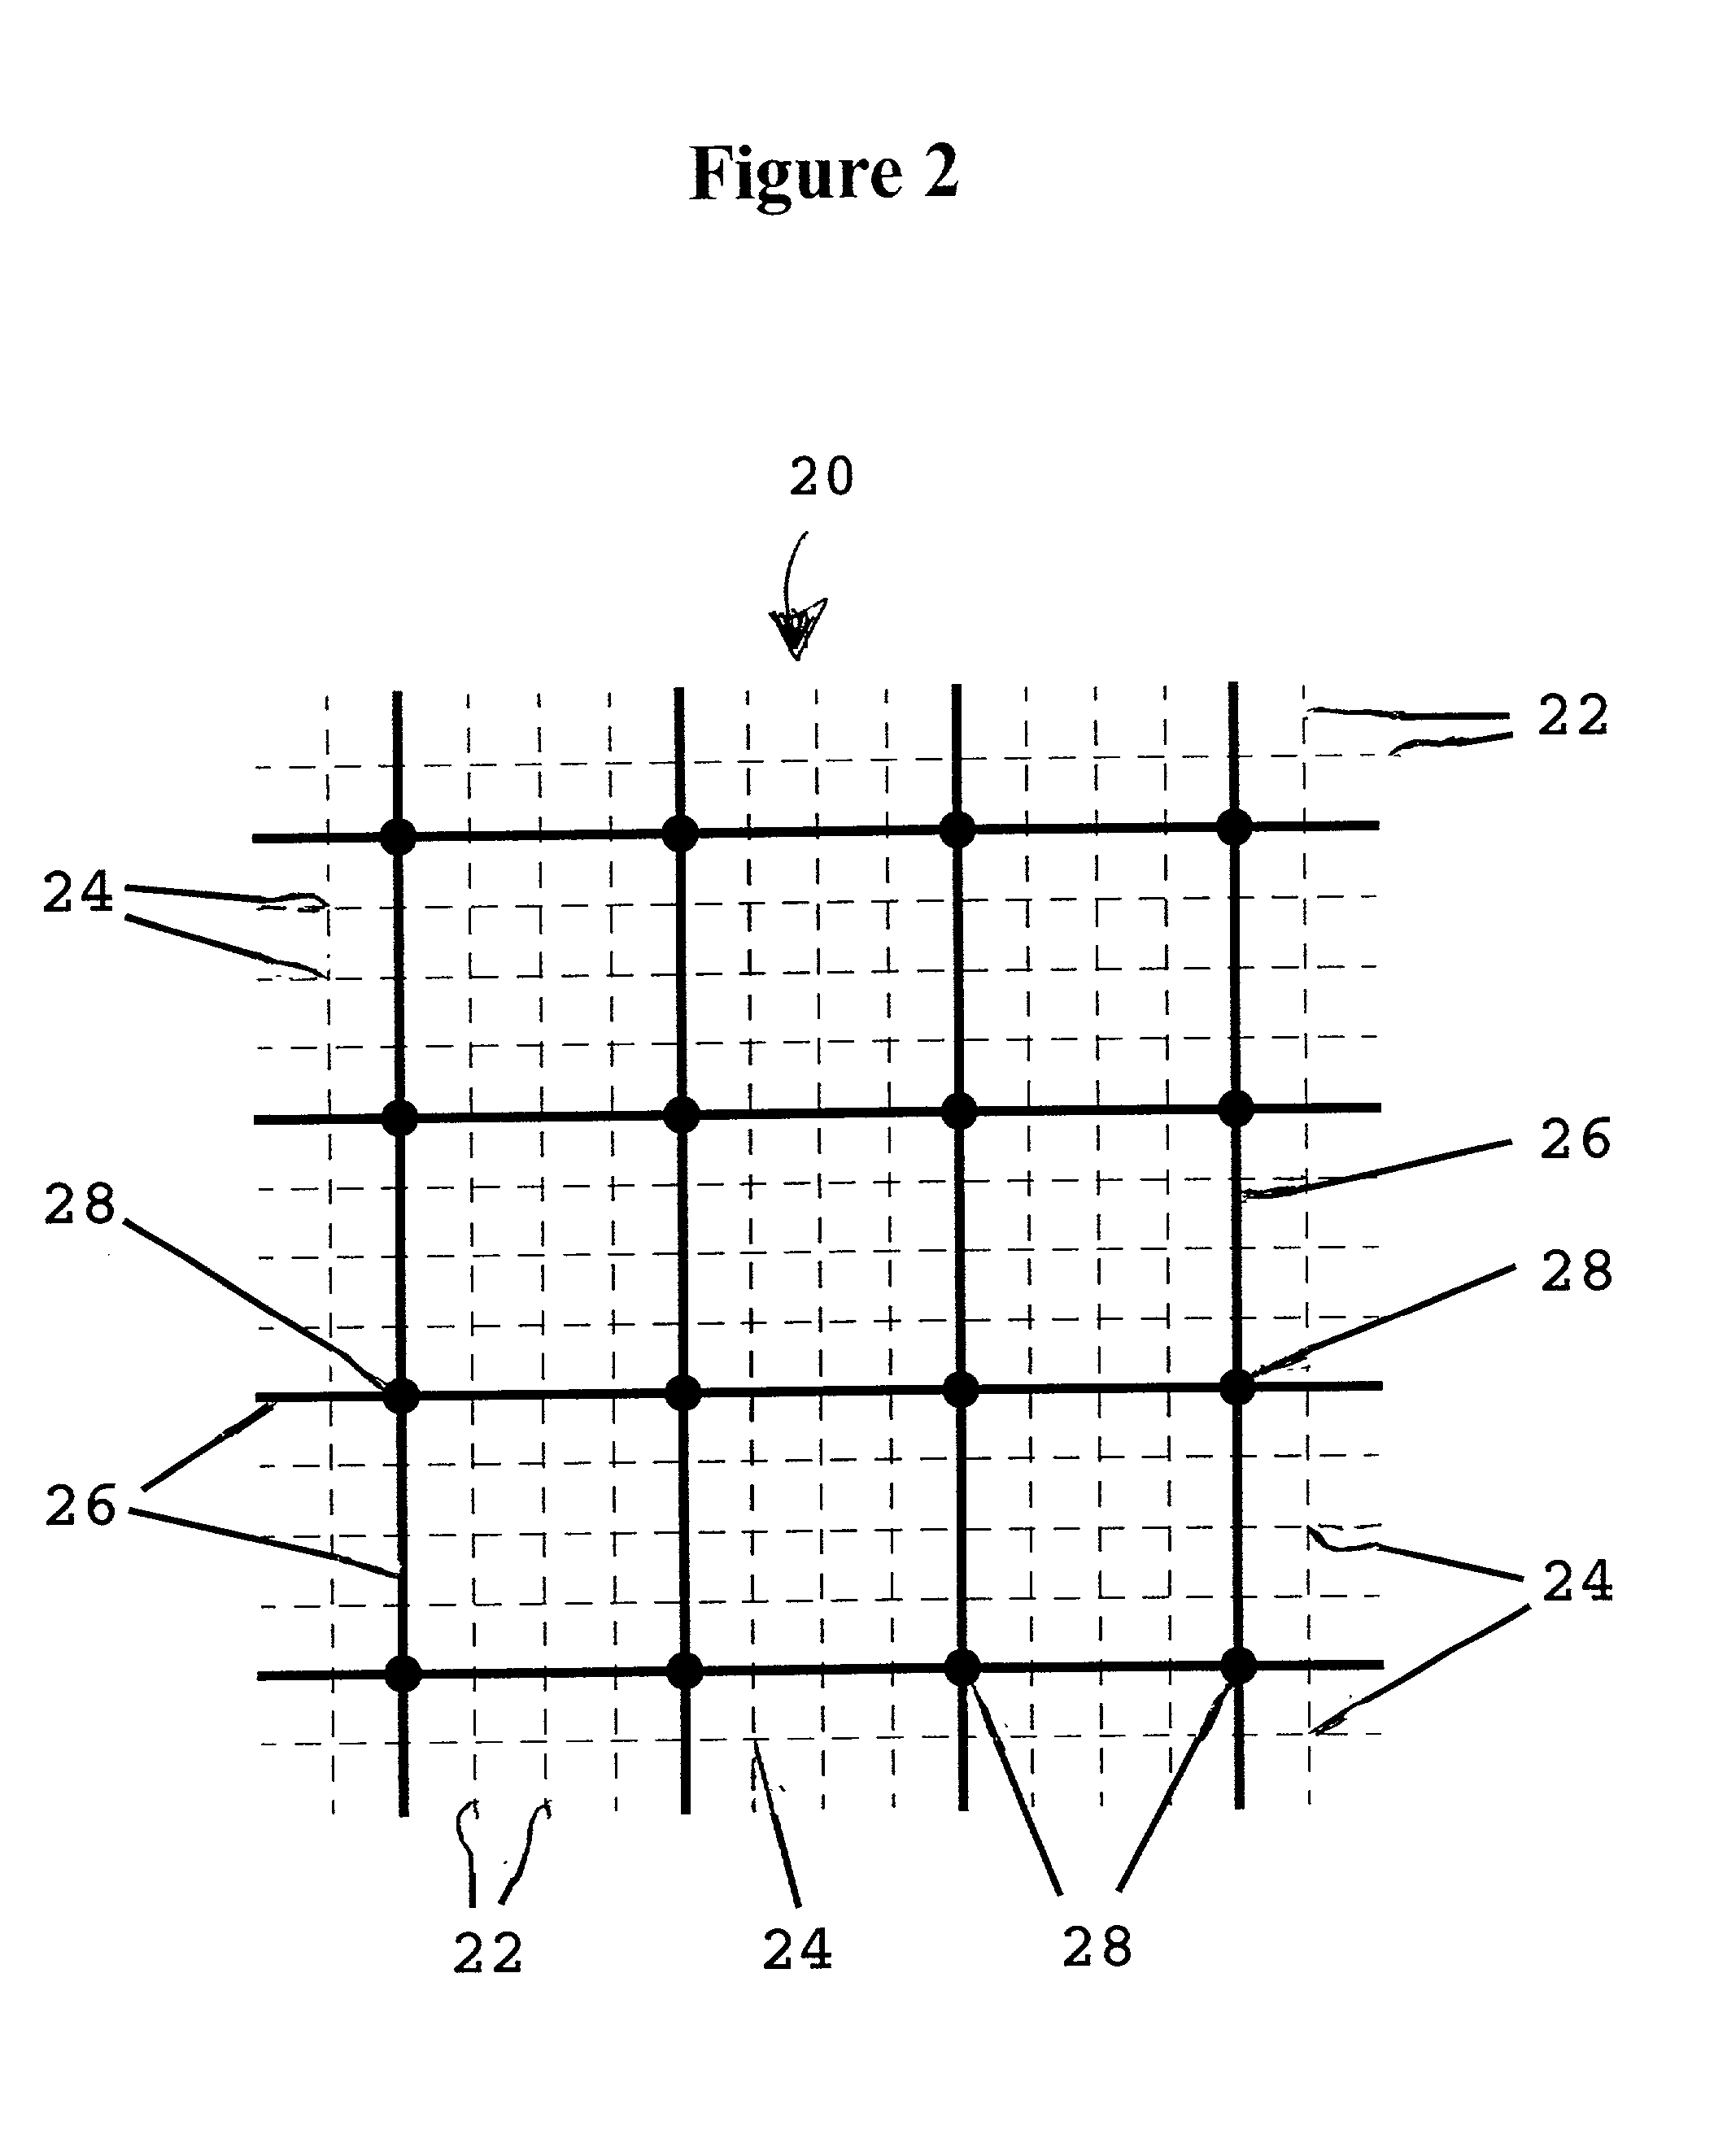 Method for supply voltage drop analysis during placement phase of chip design